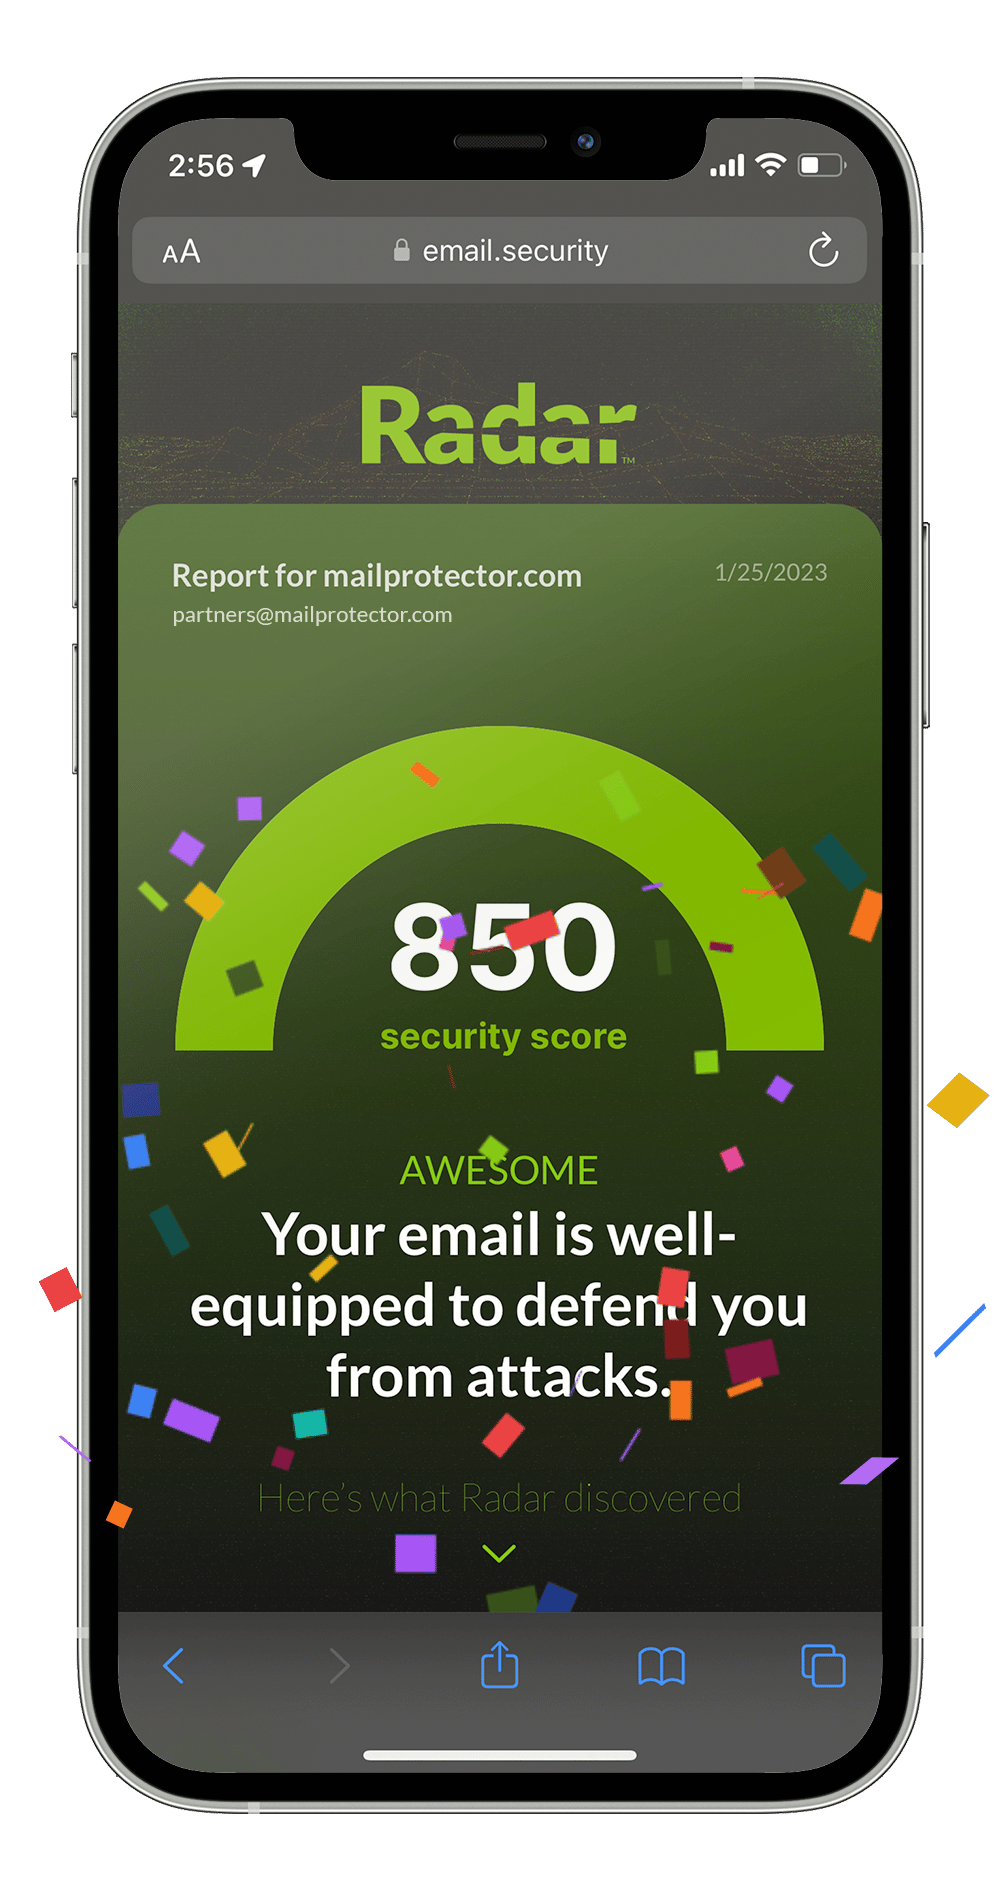 Radar gives you a personal email security score